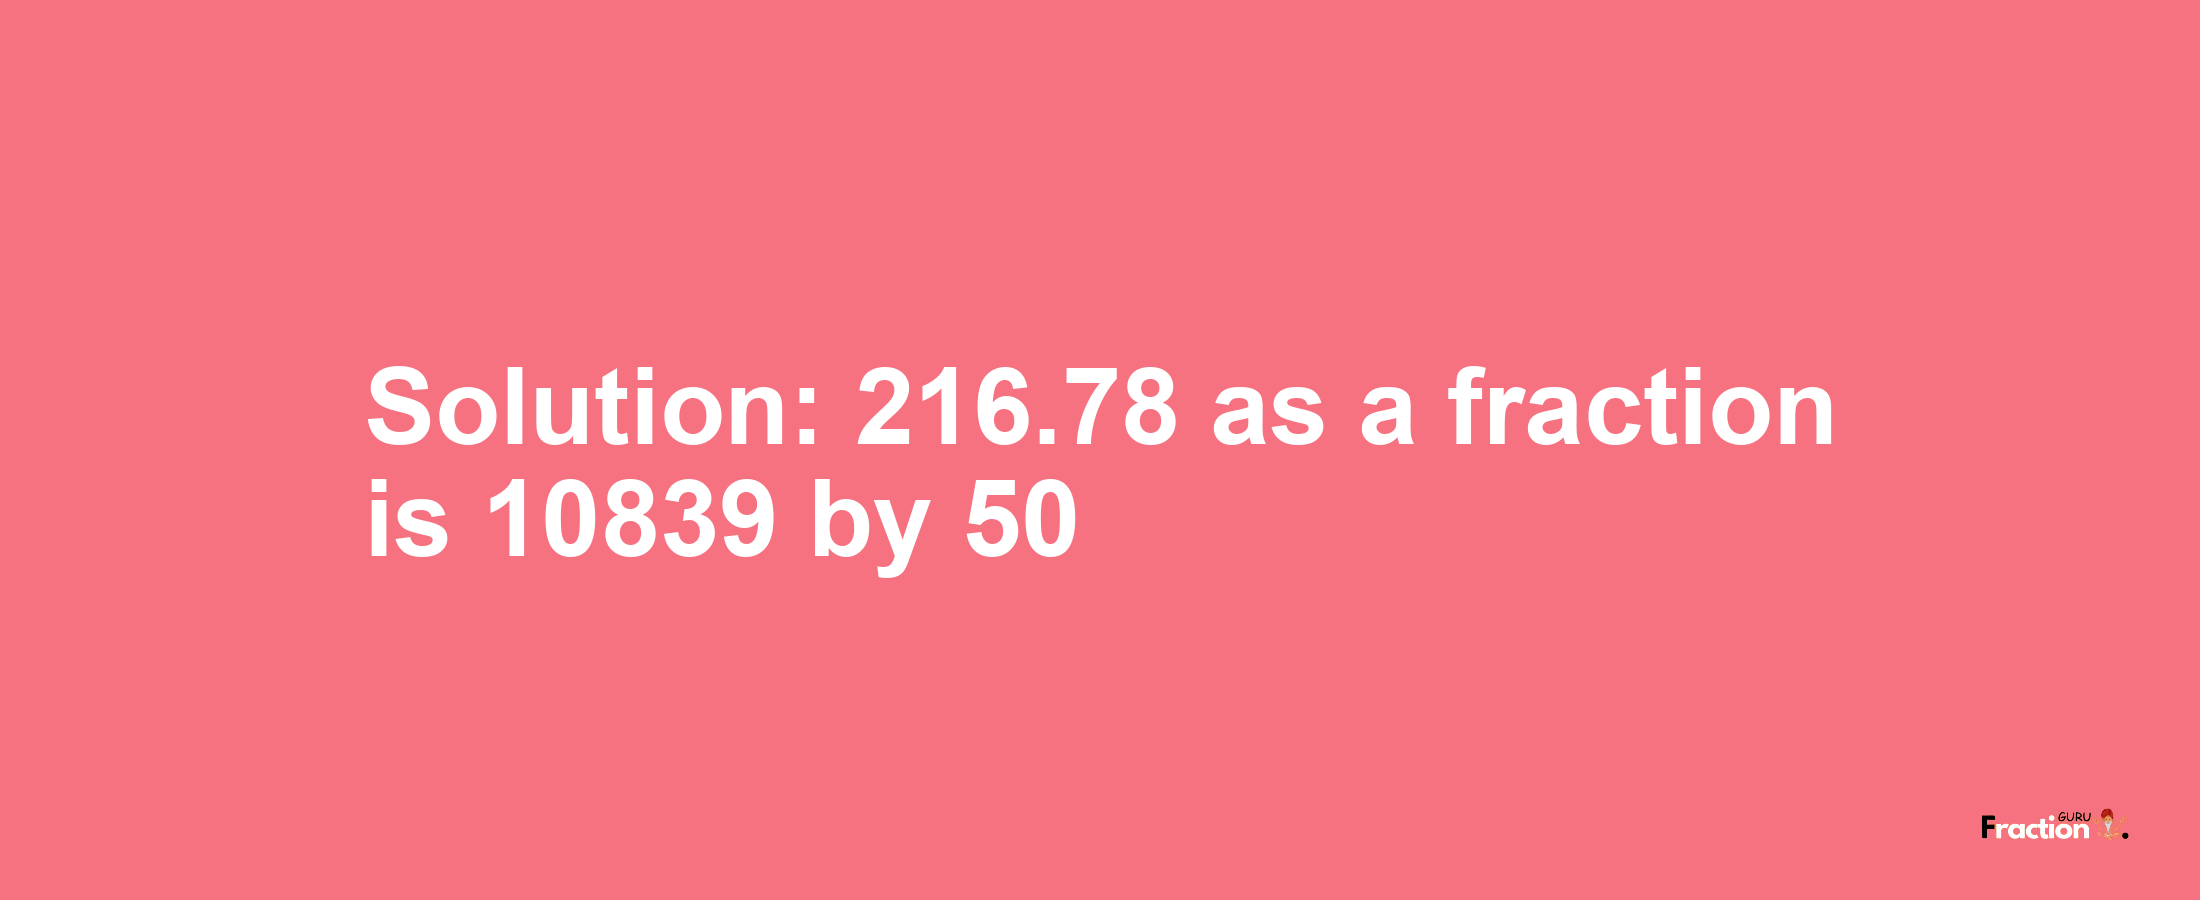 Solution:216.78 as a fraction is 10839/50